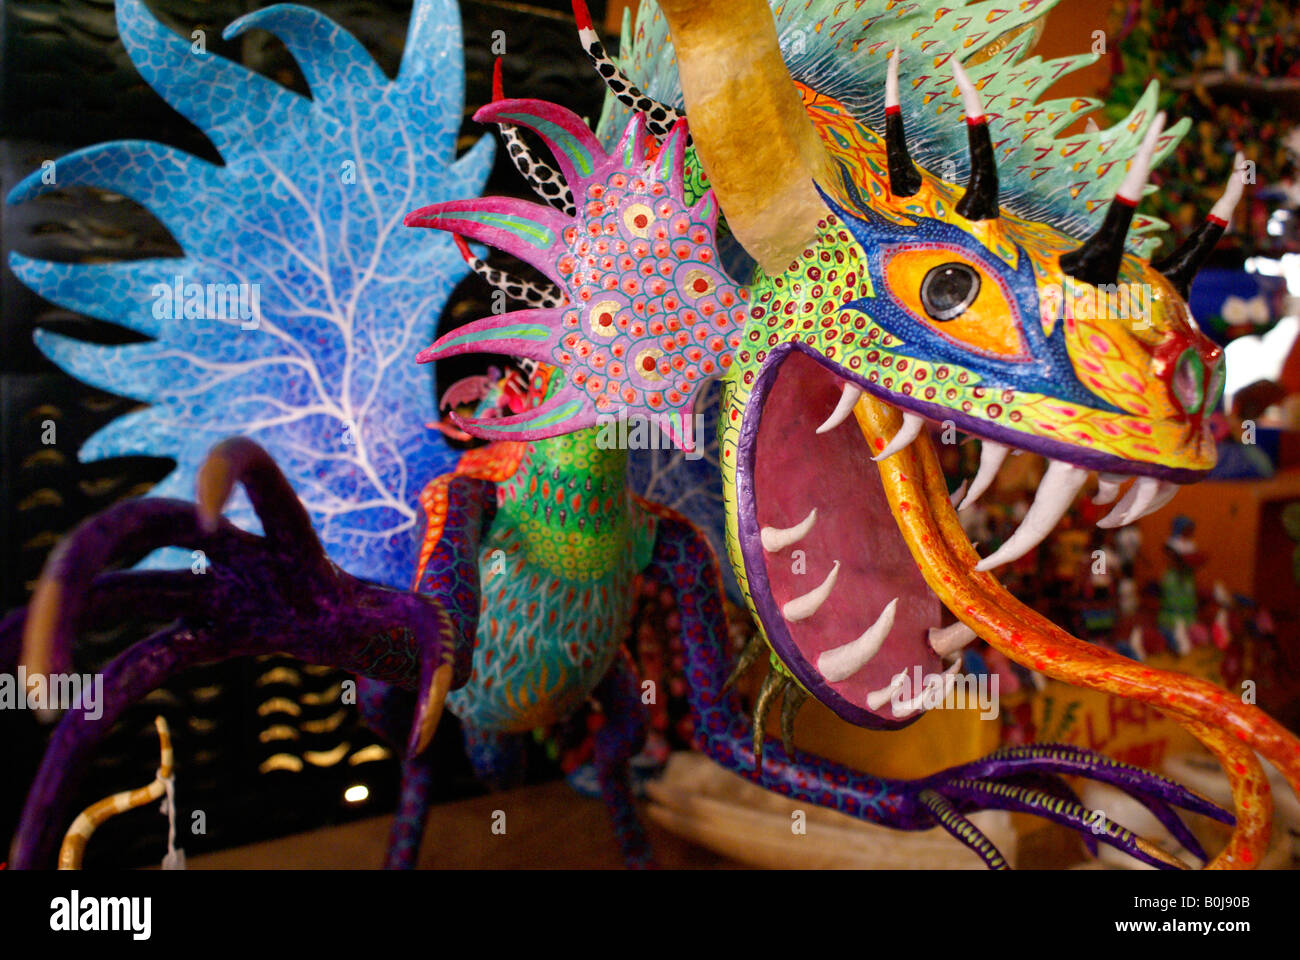 Painted dragon or alebrije from Oaxaca, Mexico Stock Photo